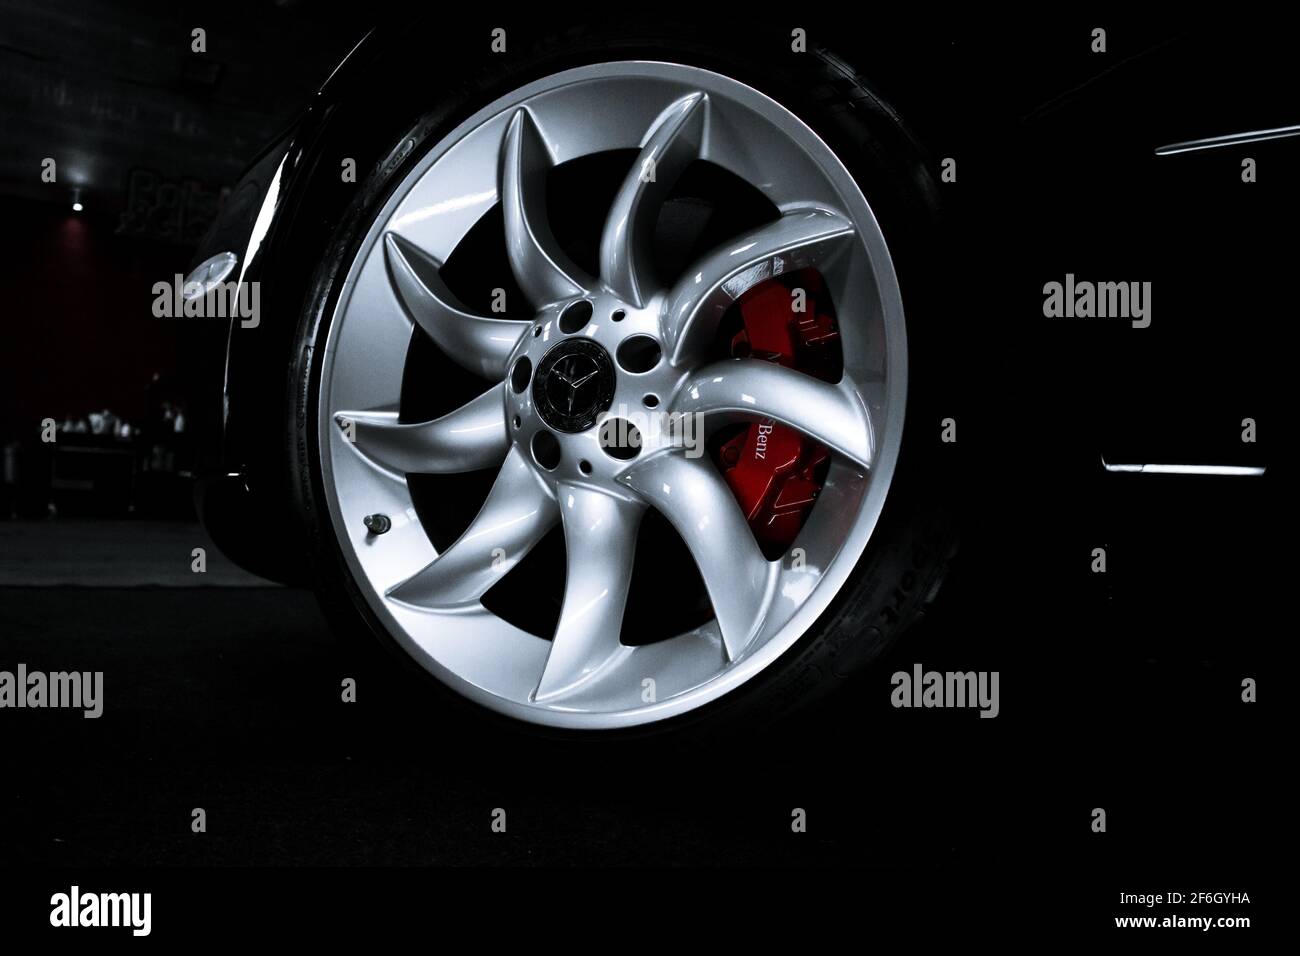 The Front Silver Alloy Wheel On A 2004 McLaren Mercedes SLR With Red Brake Callipers Stock Photo